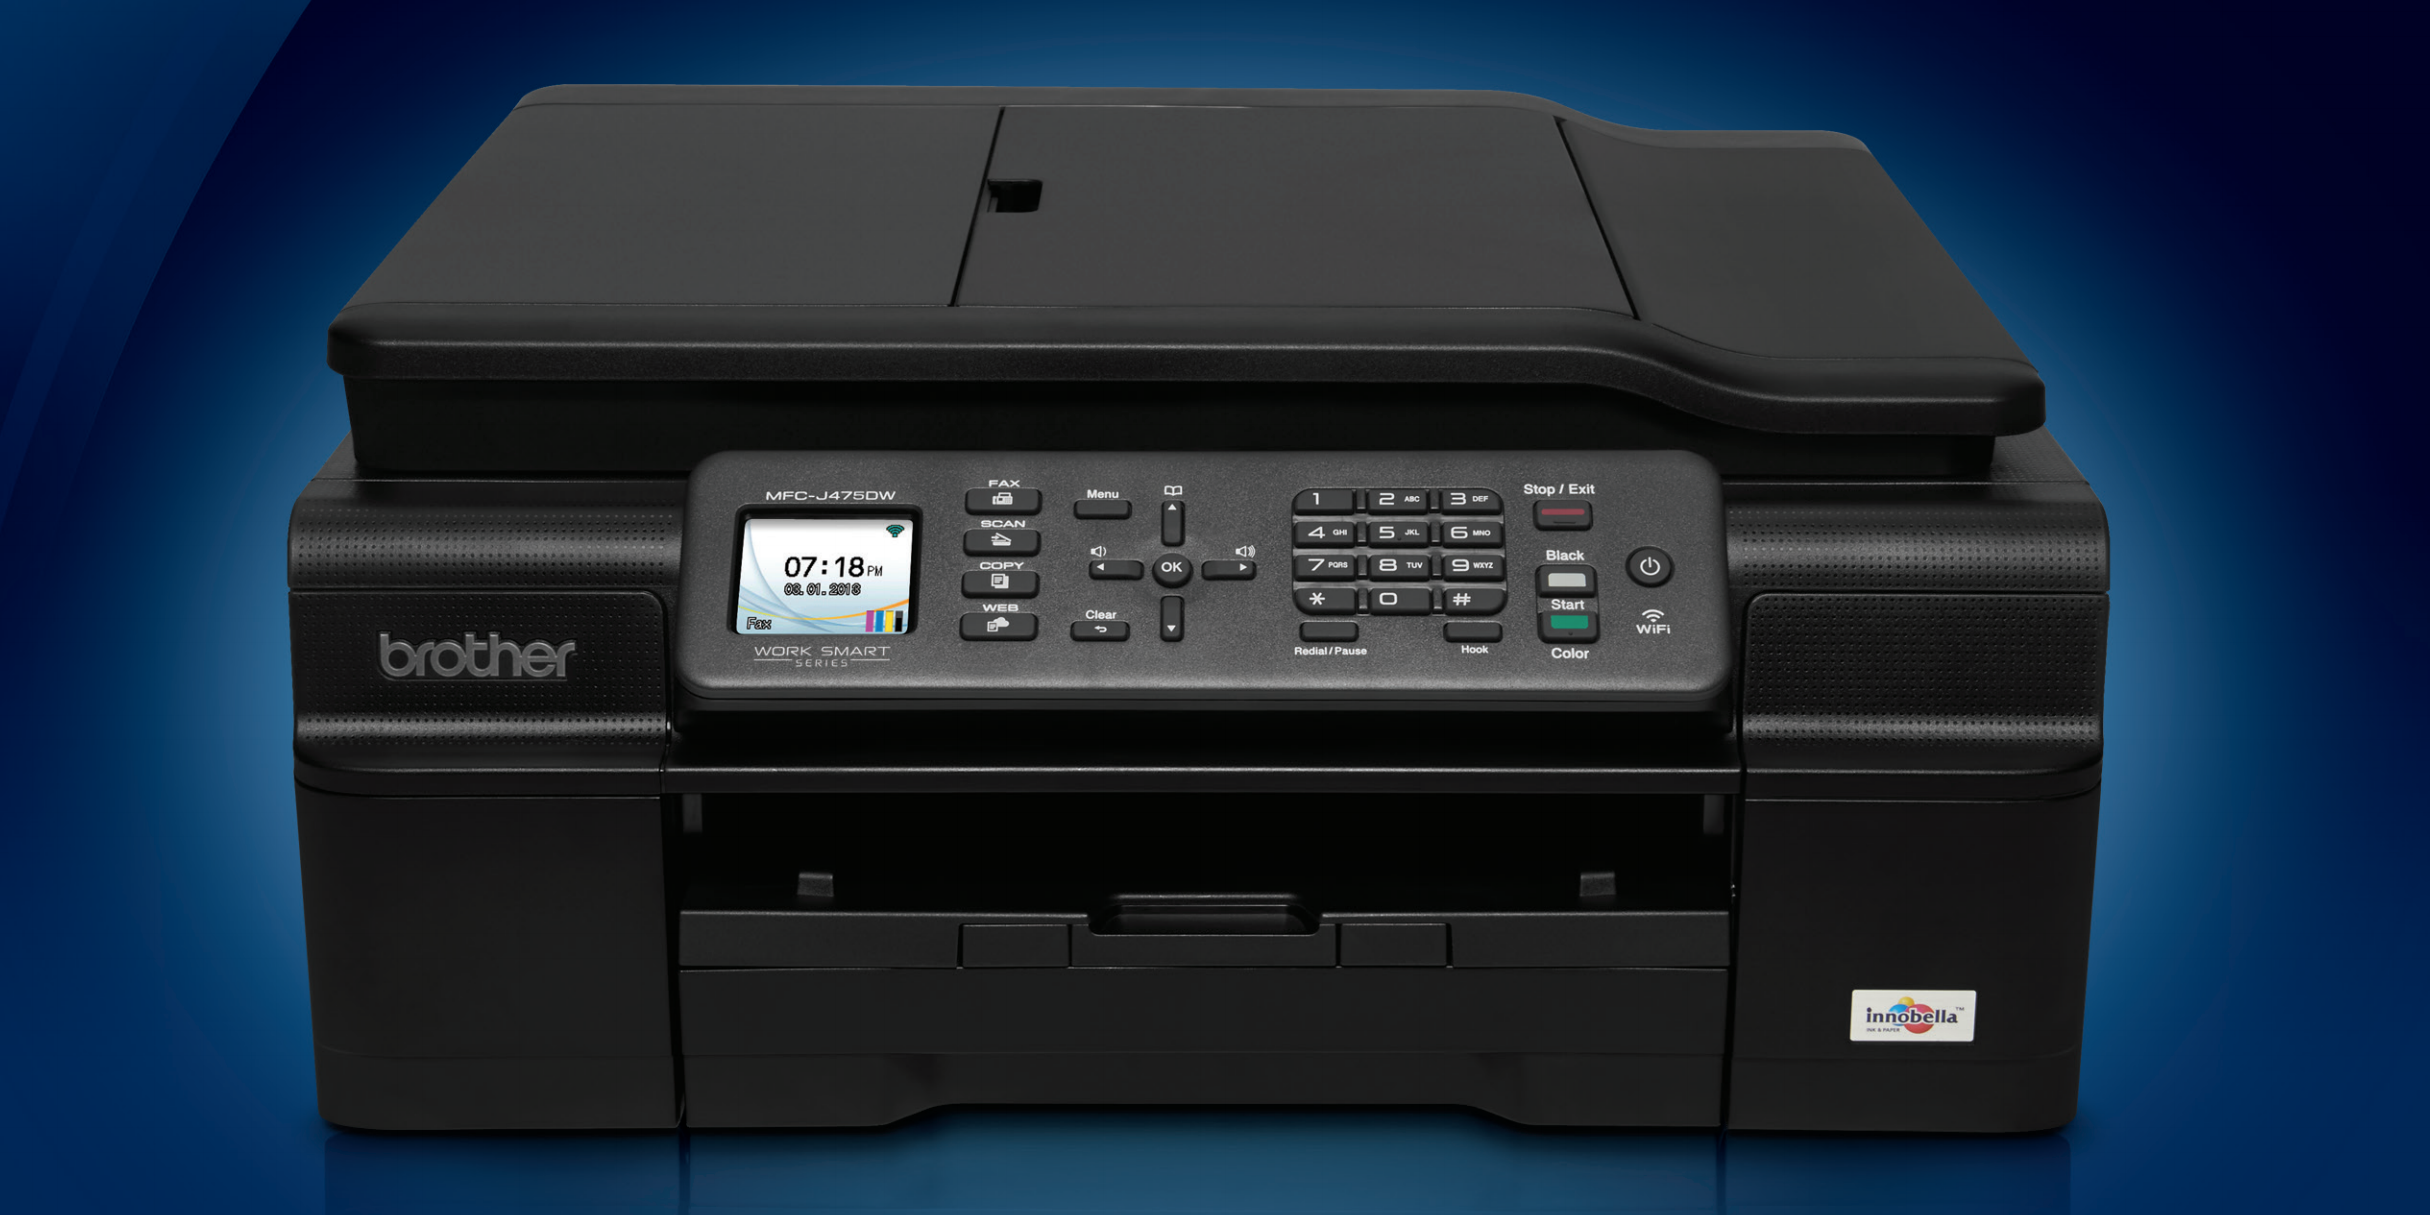 AirPrint All-in-One Inkjet Printers: Brother $45 shipped (Reg. $90), HP $70  shipped (Reg. $100)